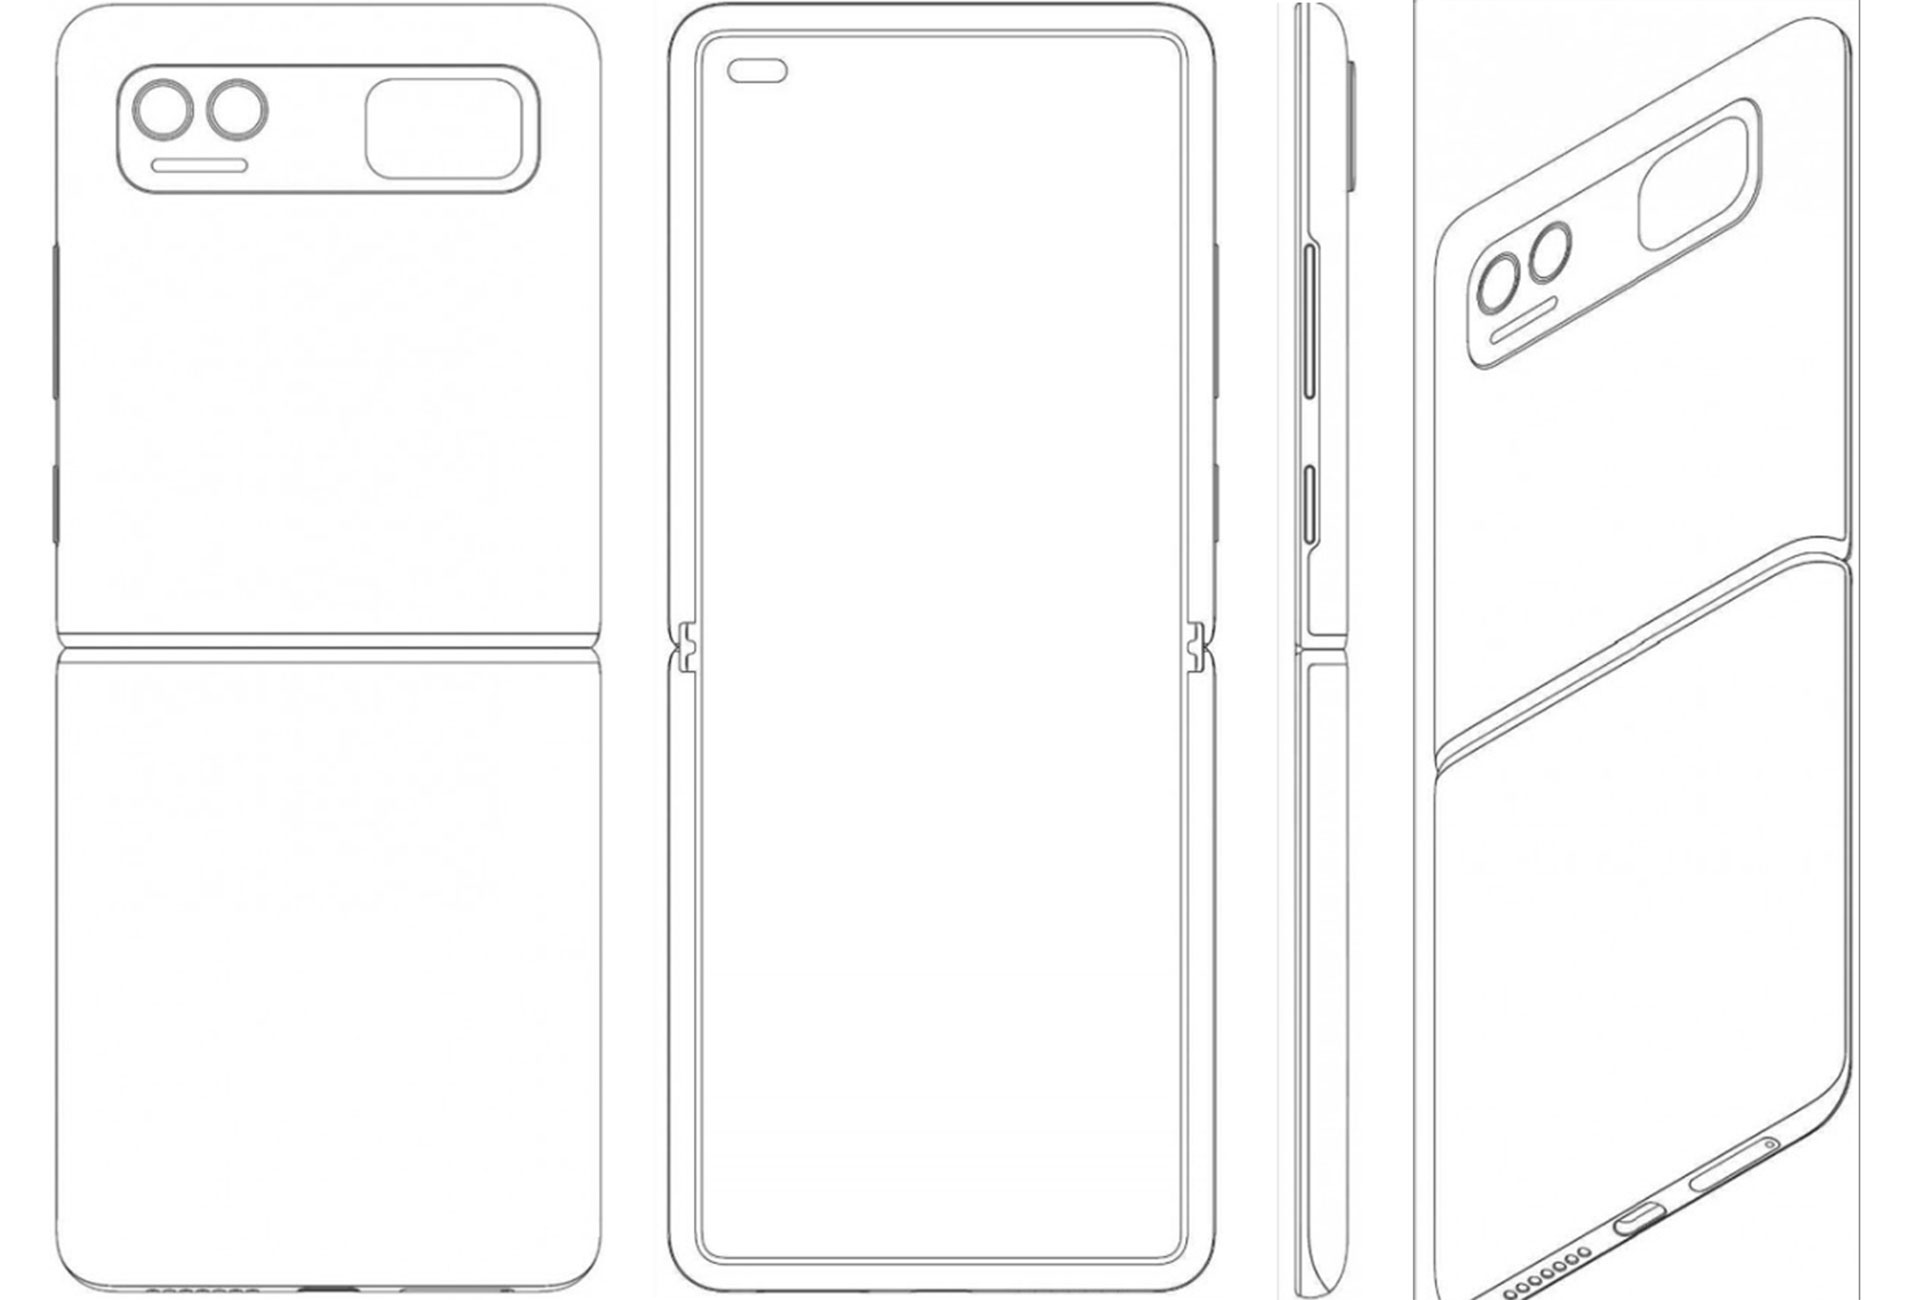 Xiaomi clamshell clamshell patent 